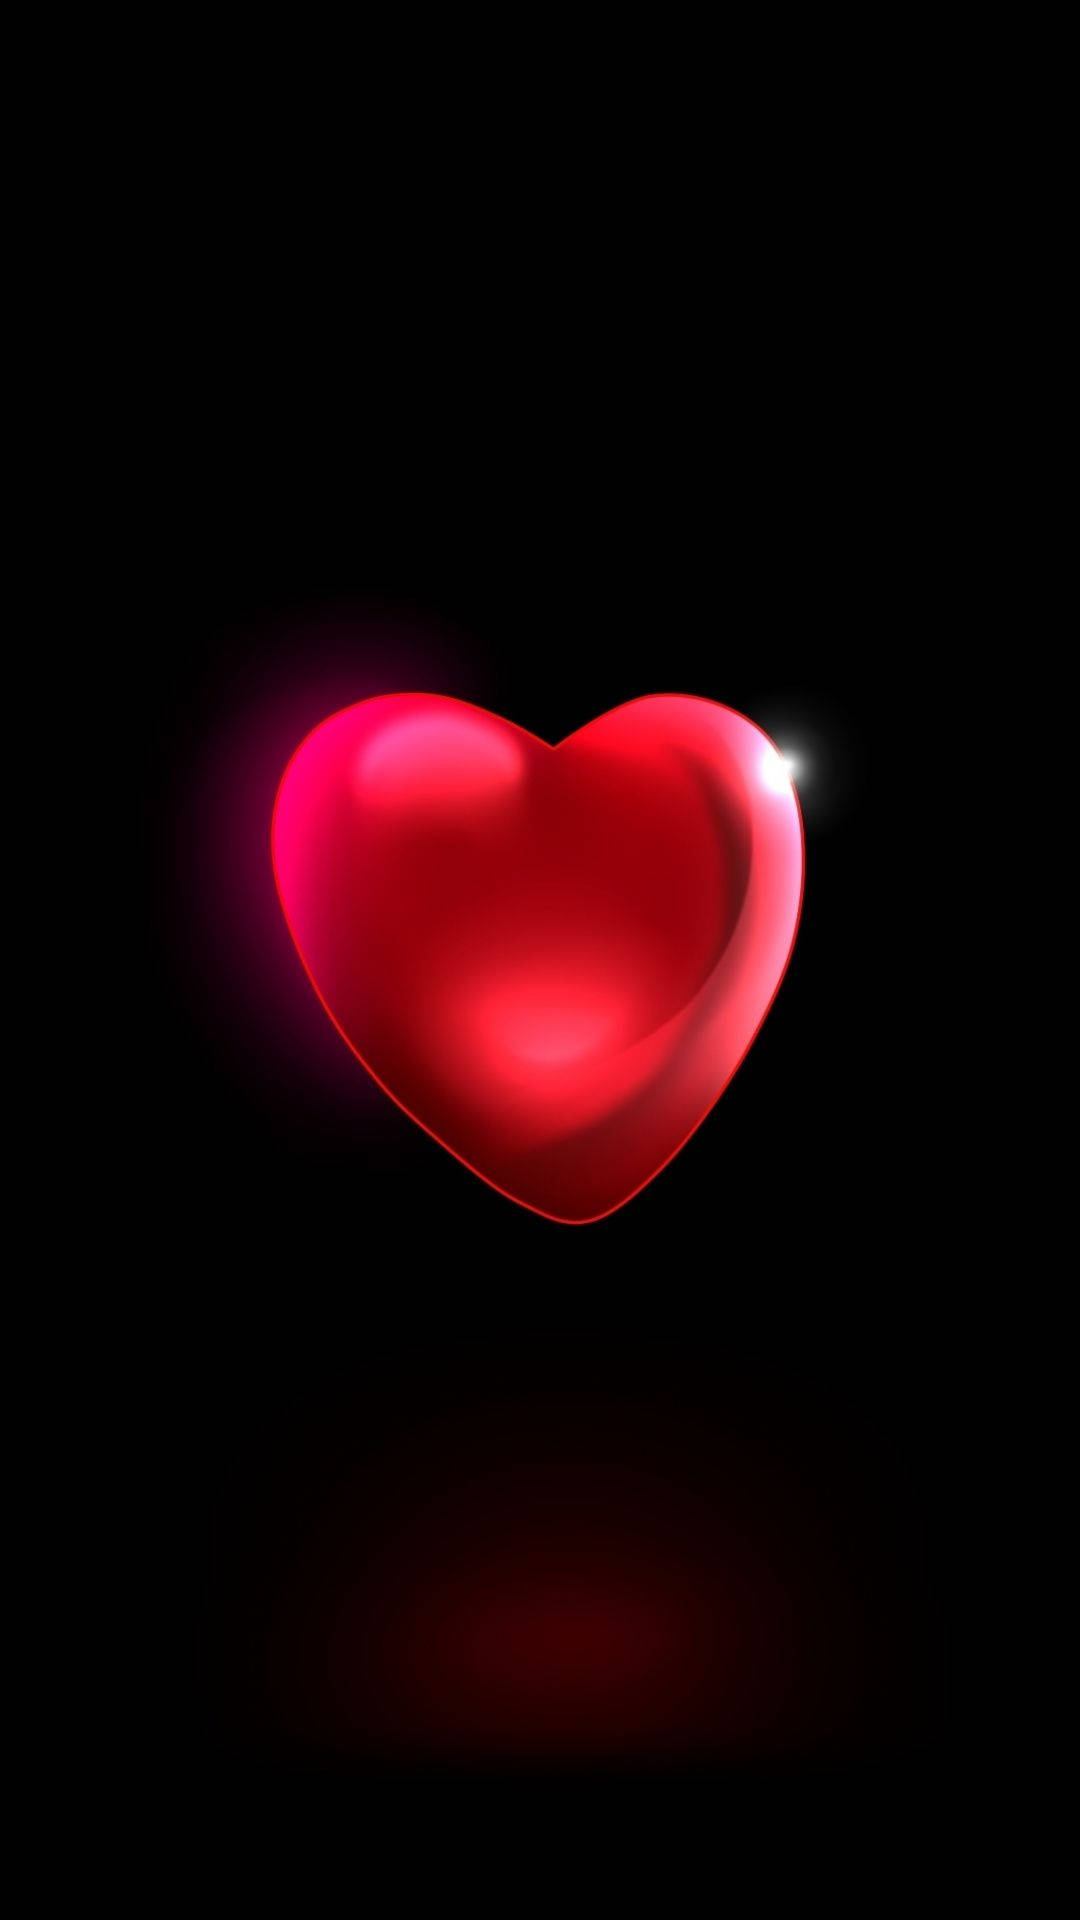 Red Heart In Black Background HD Red Aesthetic Wallpapers, HD Wallpapers